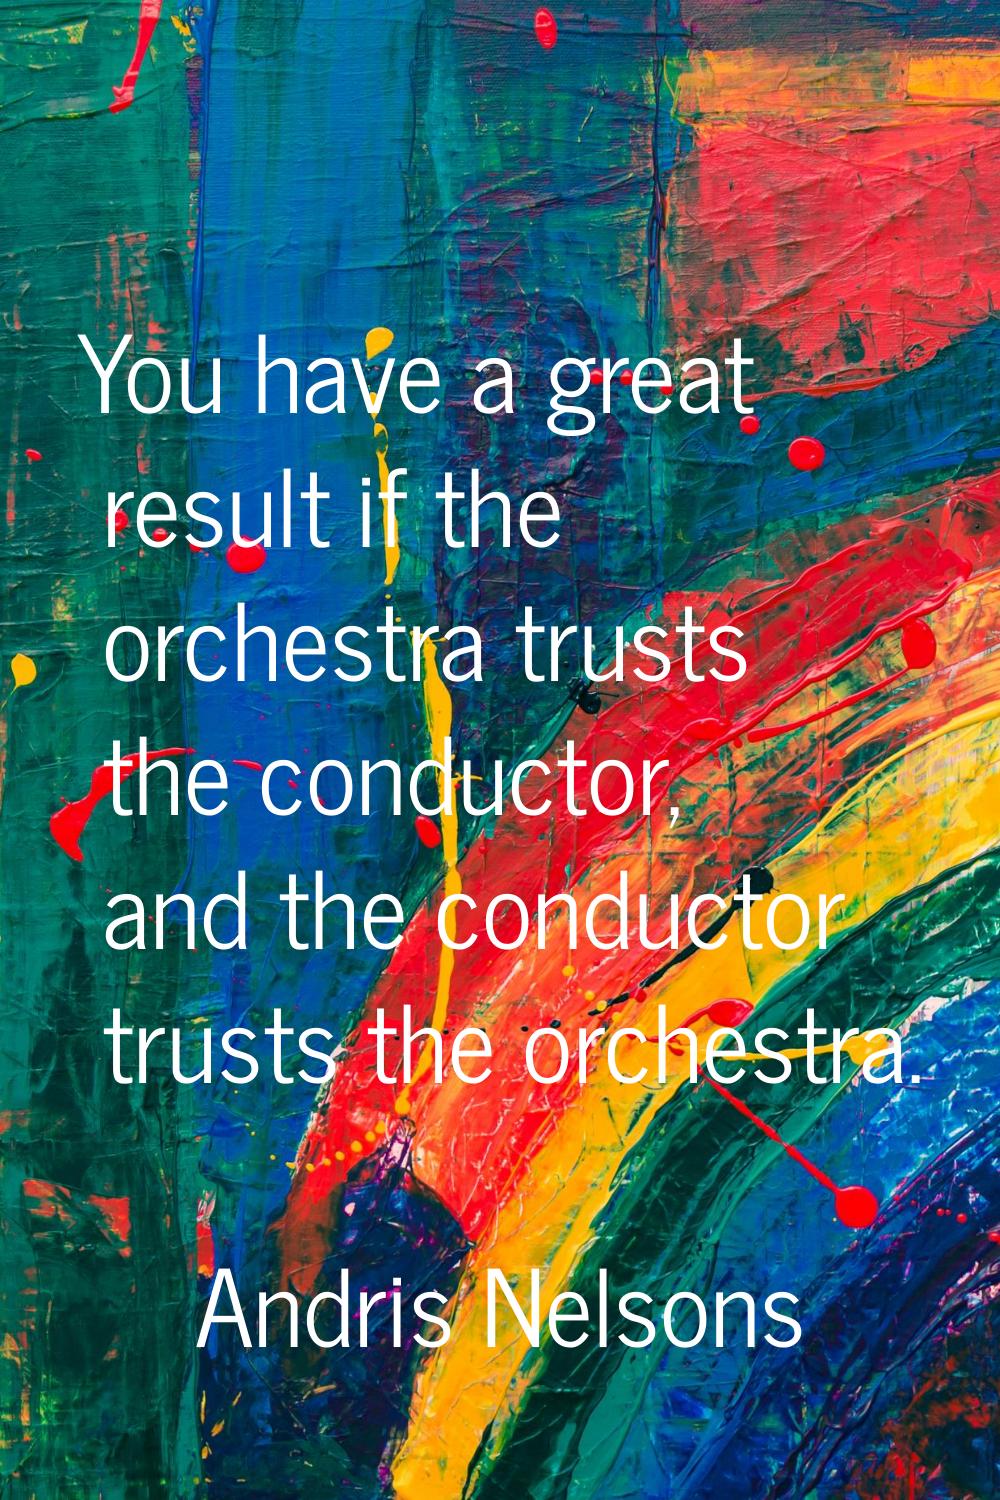 You have a great result if the orchestra trusts the conductor, and the conductor trusts the orchest